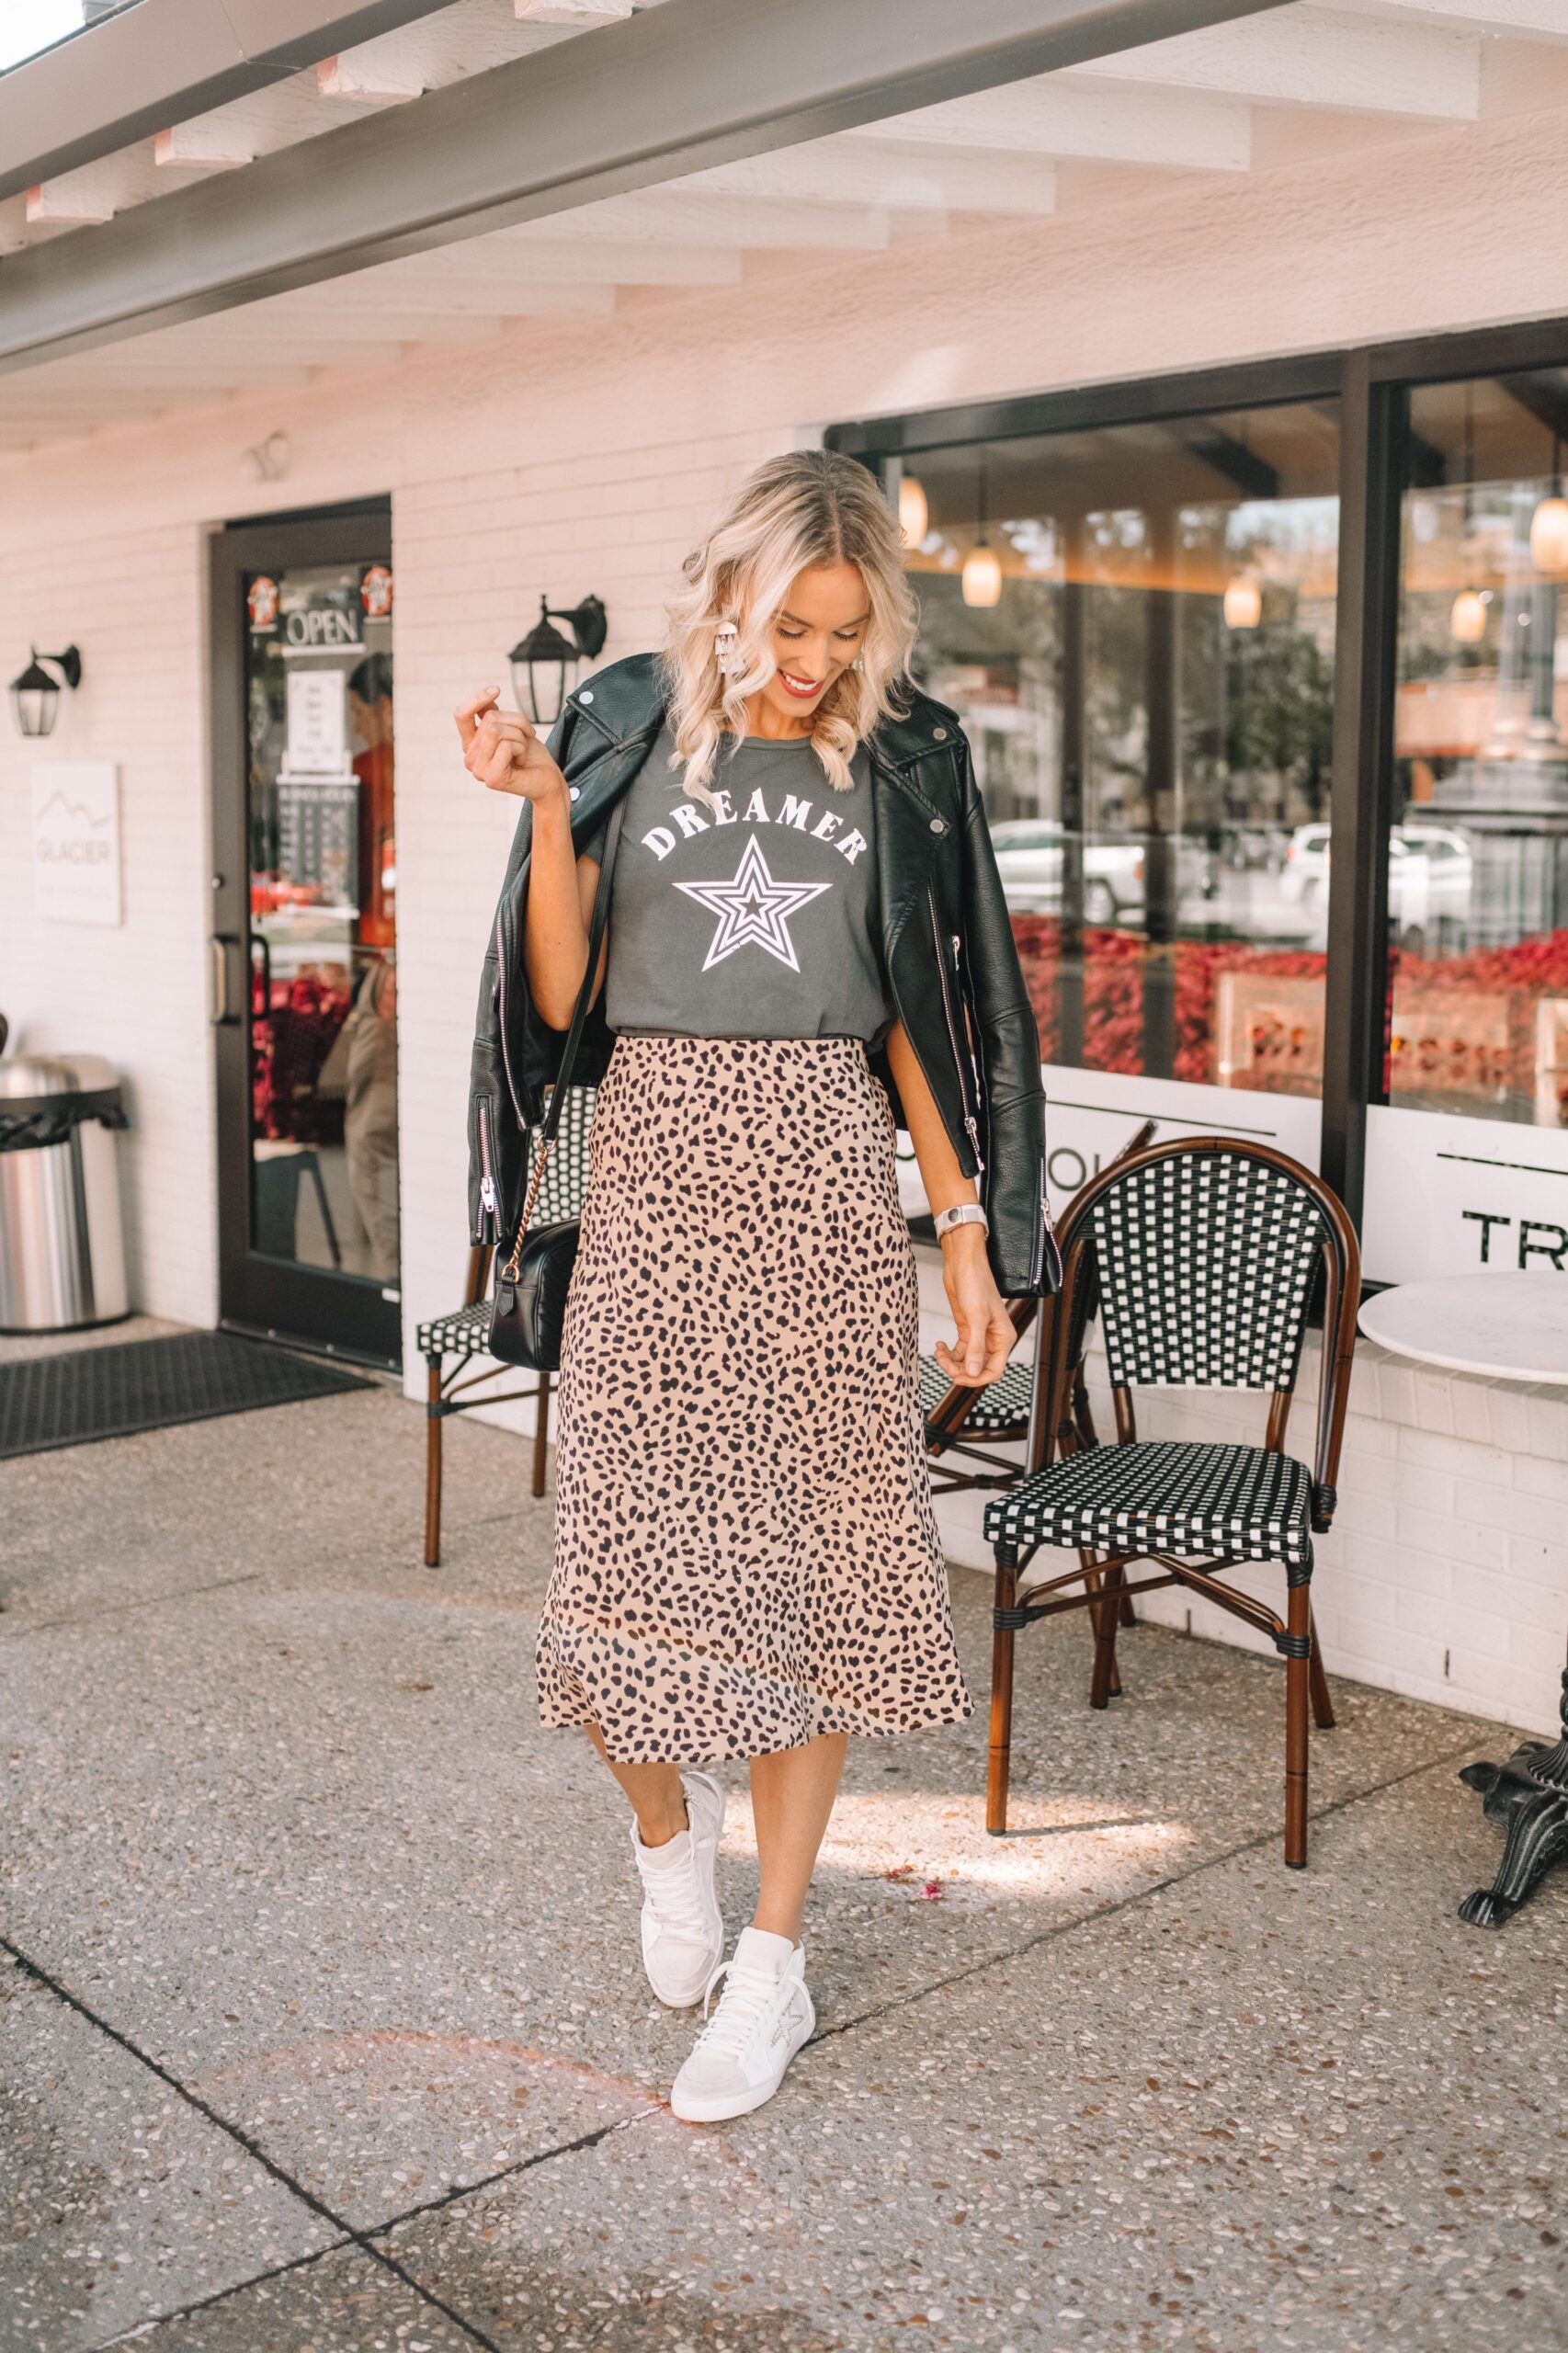 How To Style A Midi Skirt